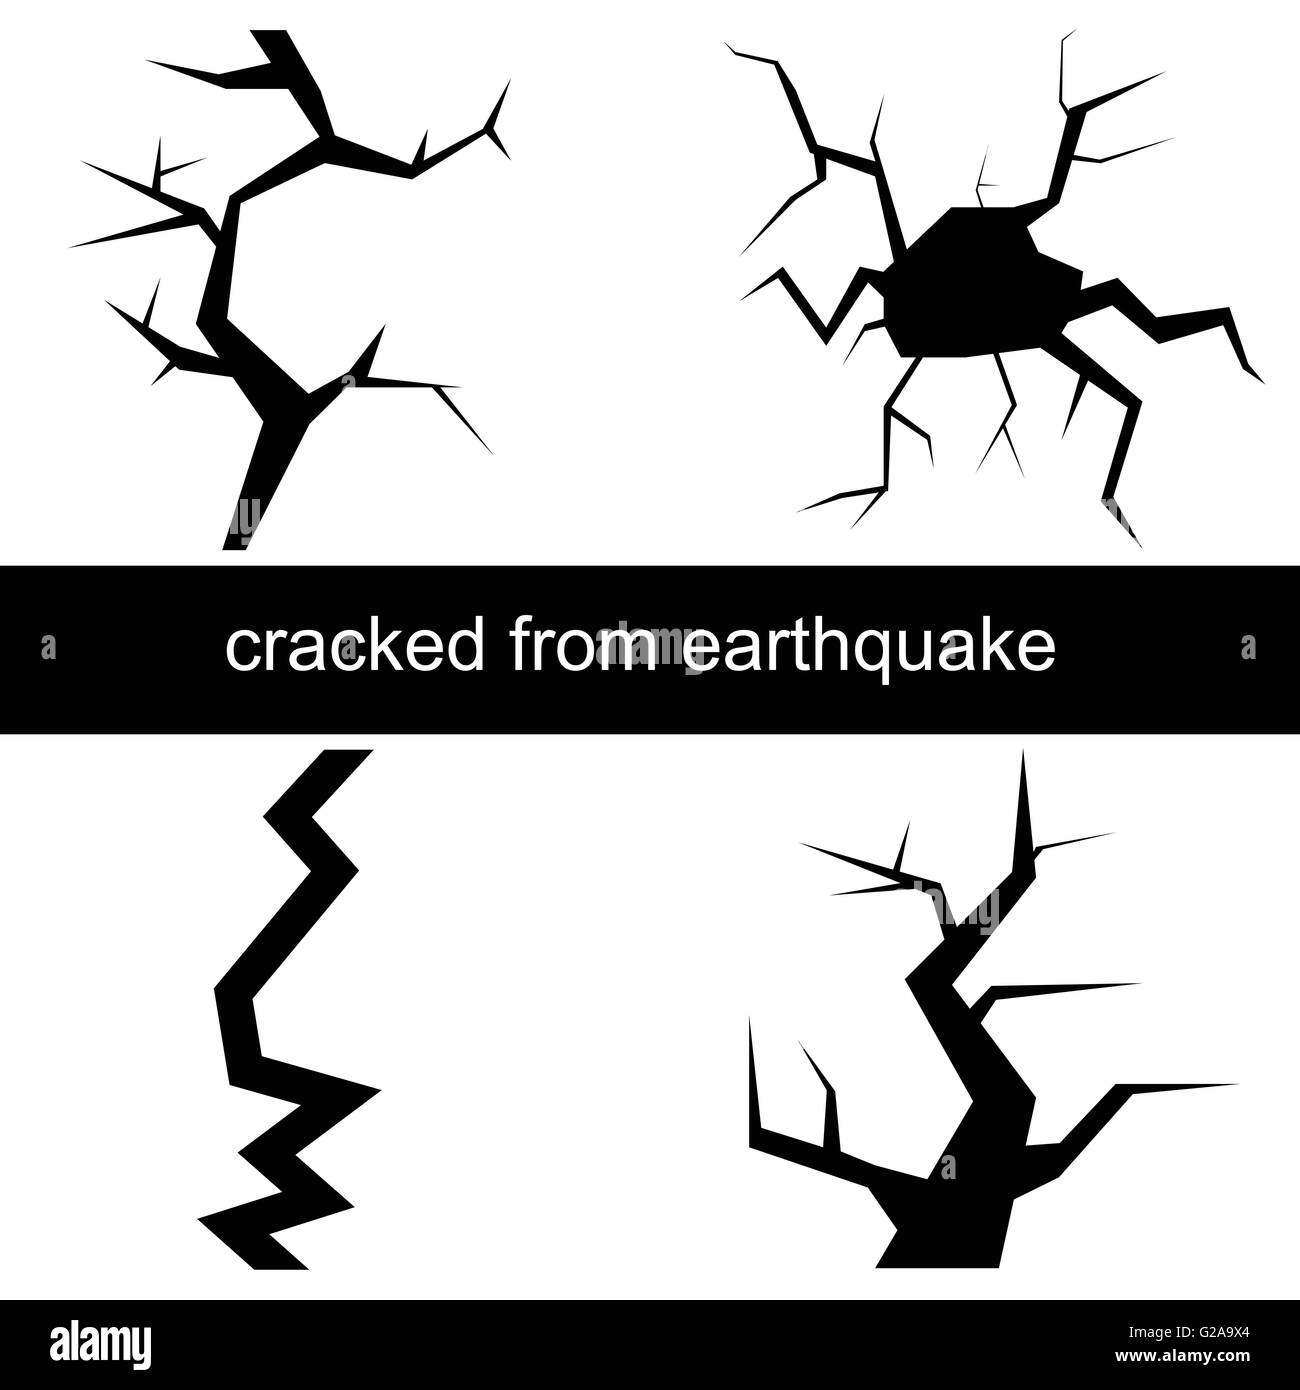 Vector illustration of a crack from the earthquake Stock Vector